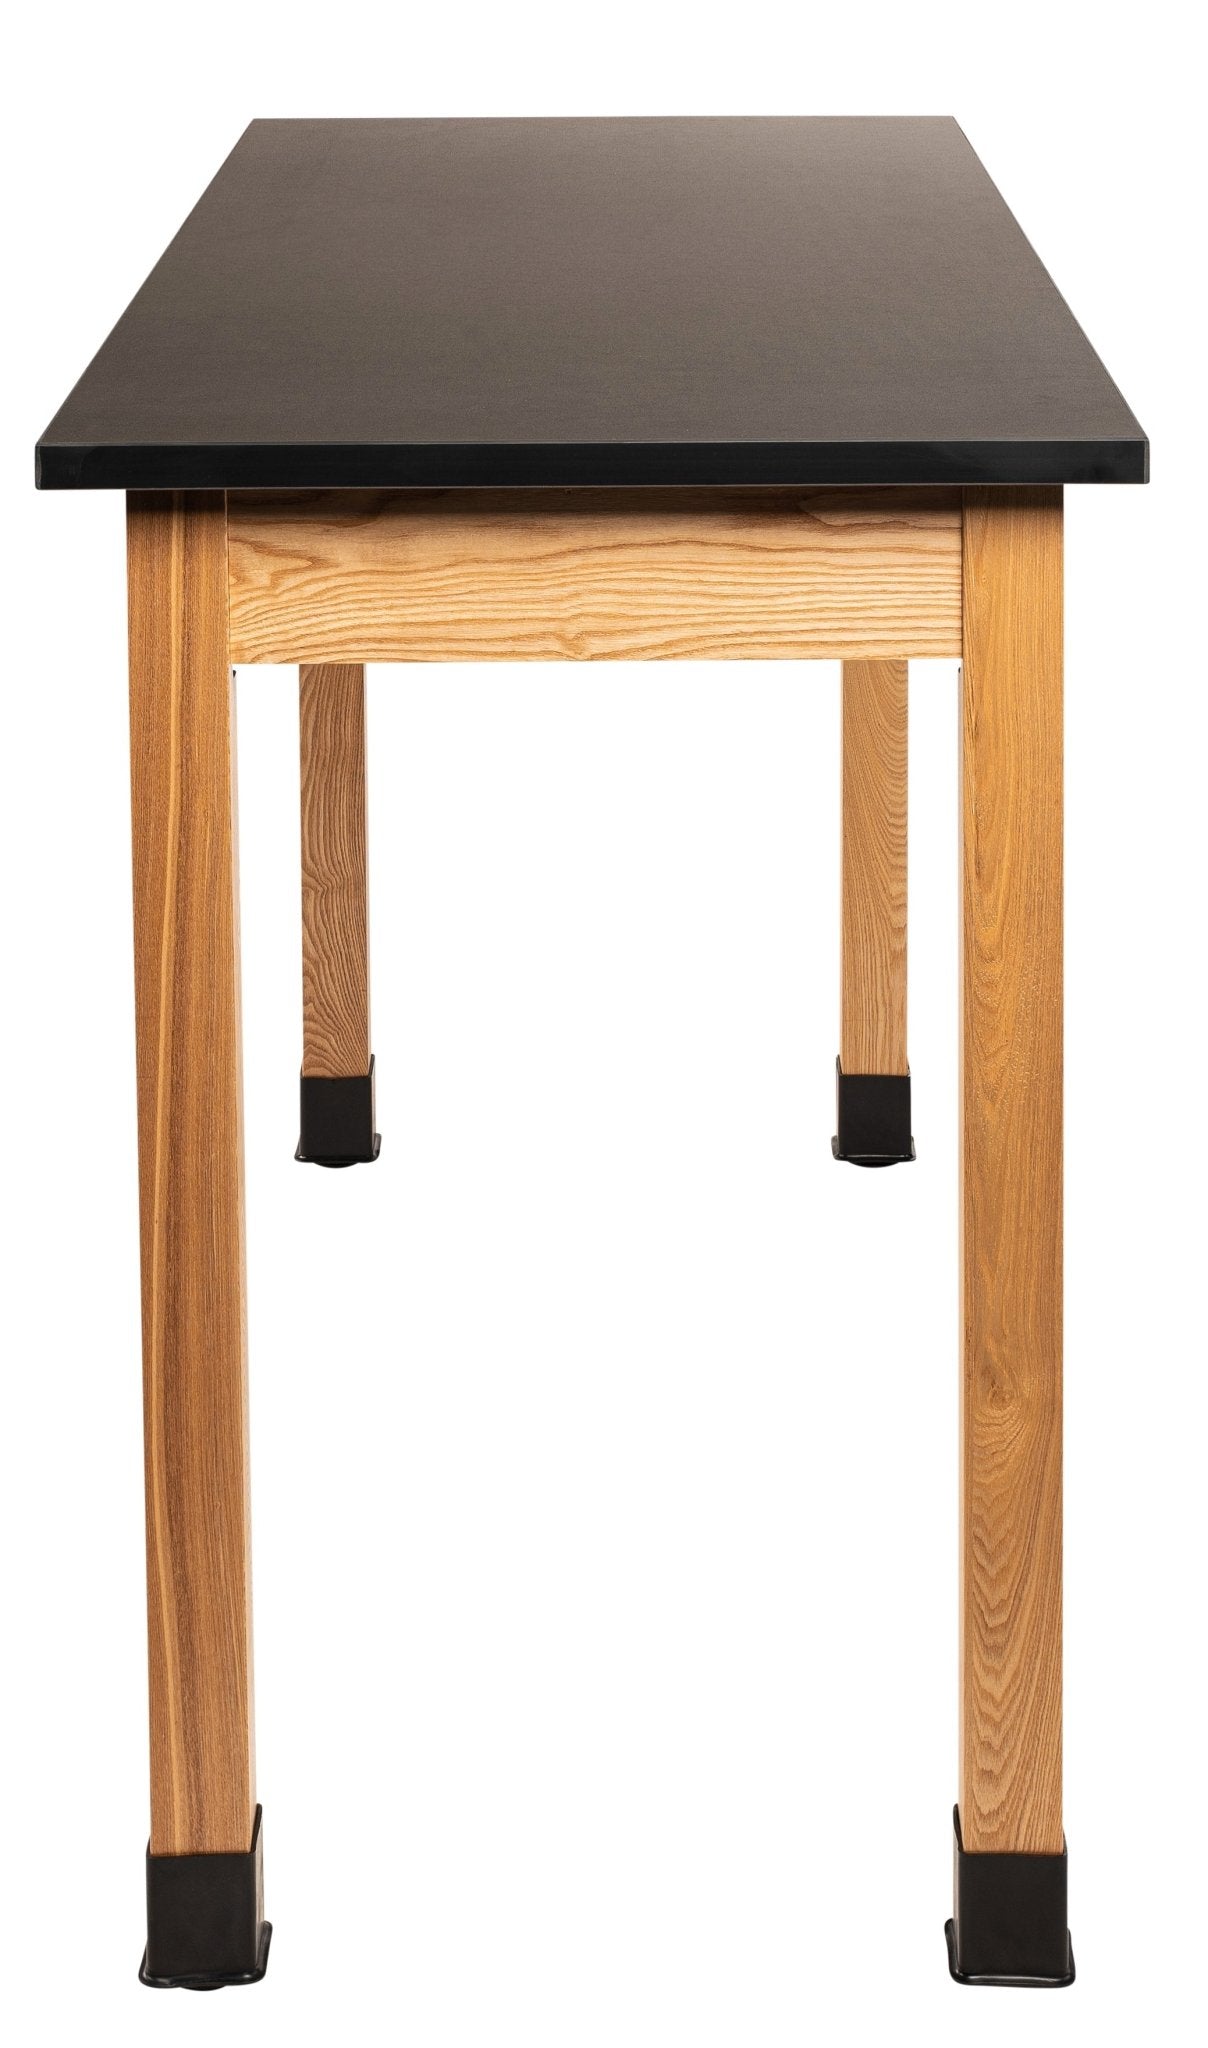 NPS Science Lab Table 24" x 60" x 36"H (National Public Seating NPS-SLT2-2460) - SchoolOutlet